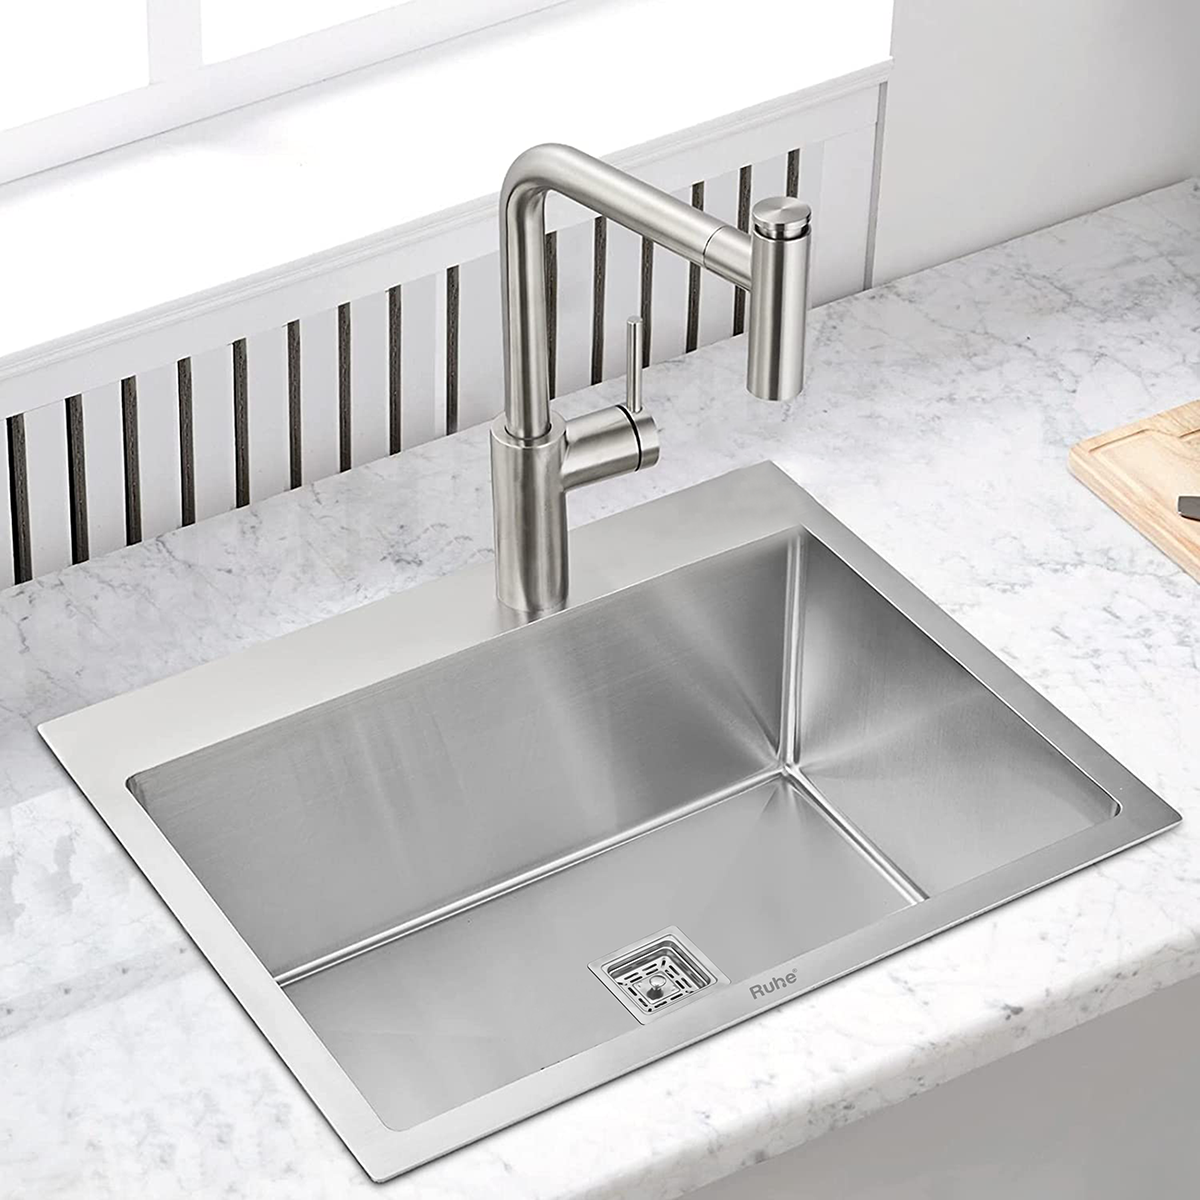 Handmade Single Bowl 304-Grade Kitchen Sink (18 x 16 x 10 Inches) with Tap Hole installed